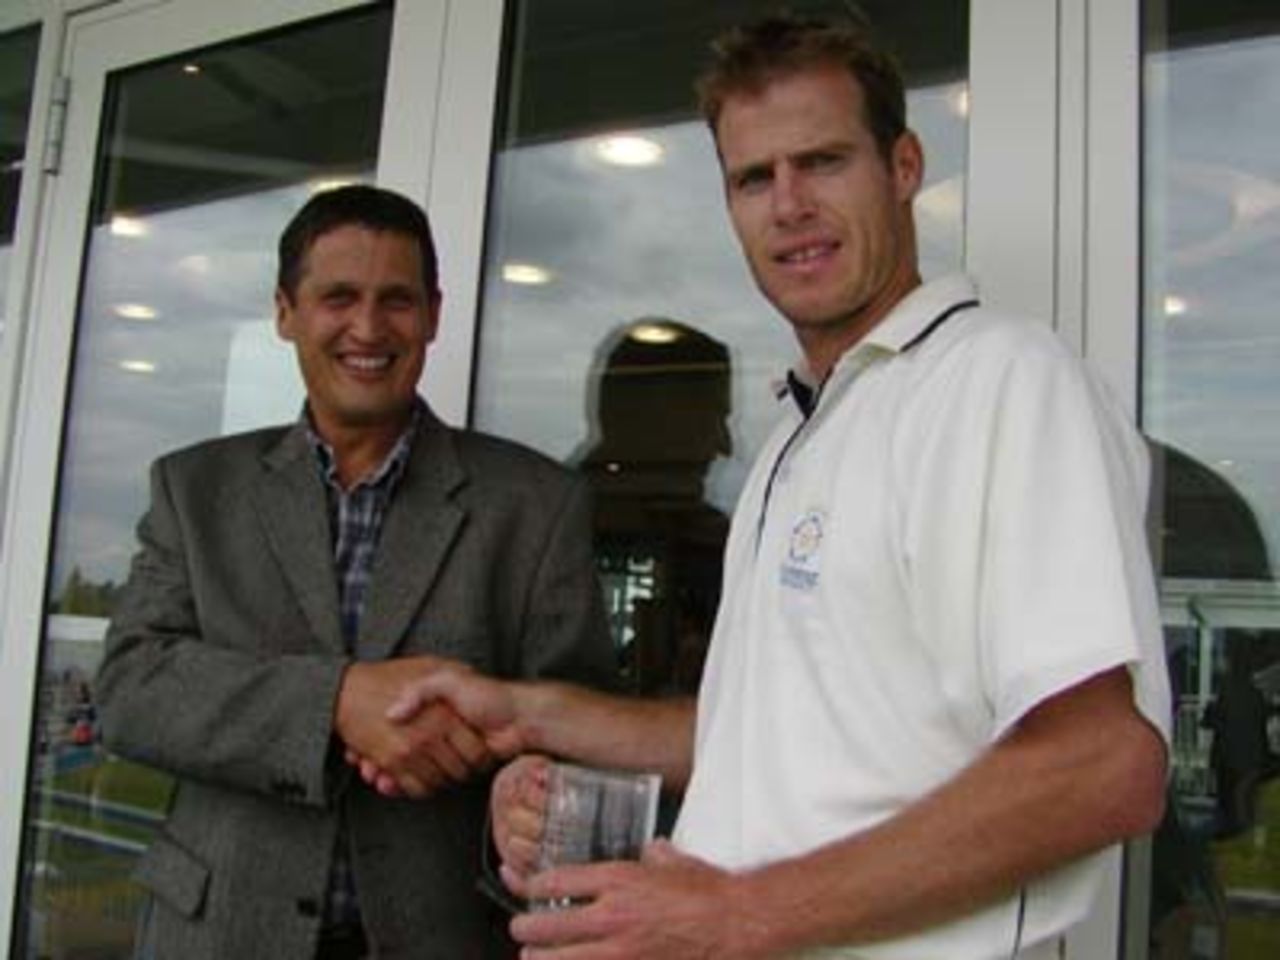 Neil Johnson receives the Hampshire player of the month (June) award from Courage breweries